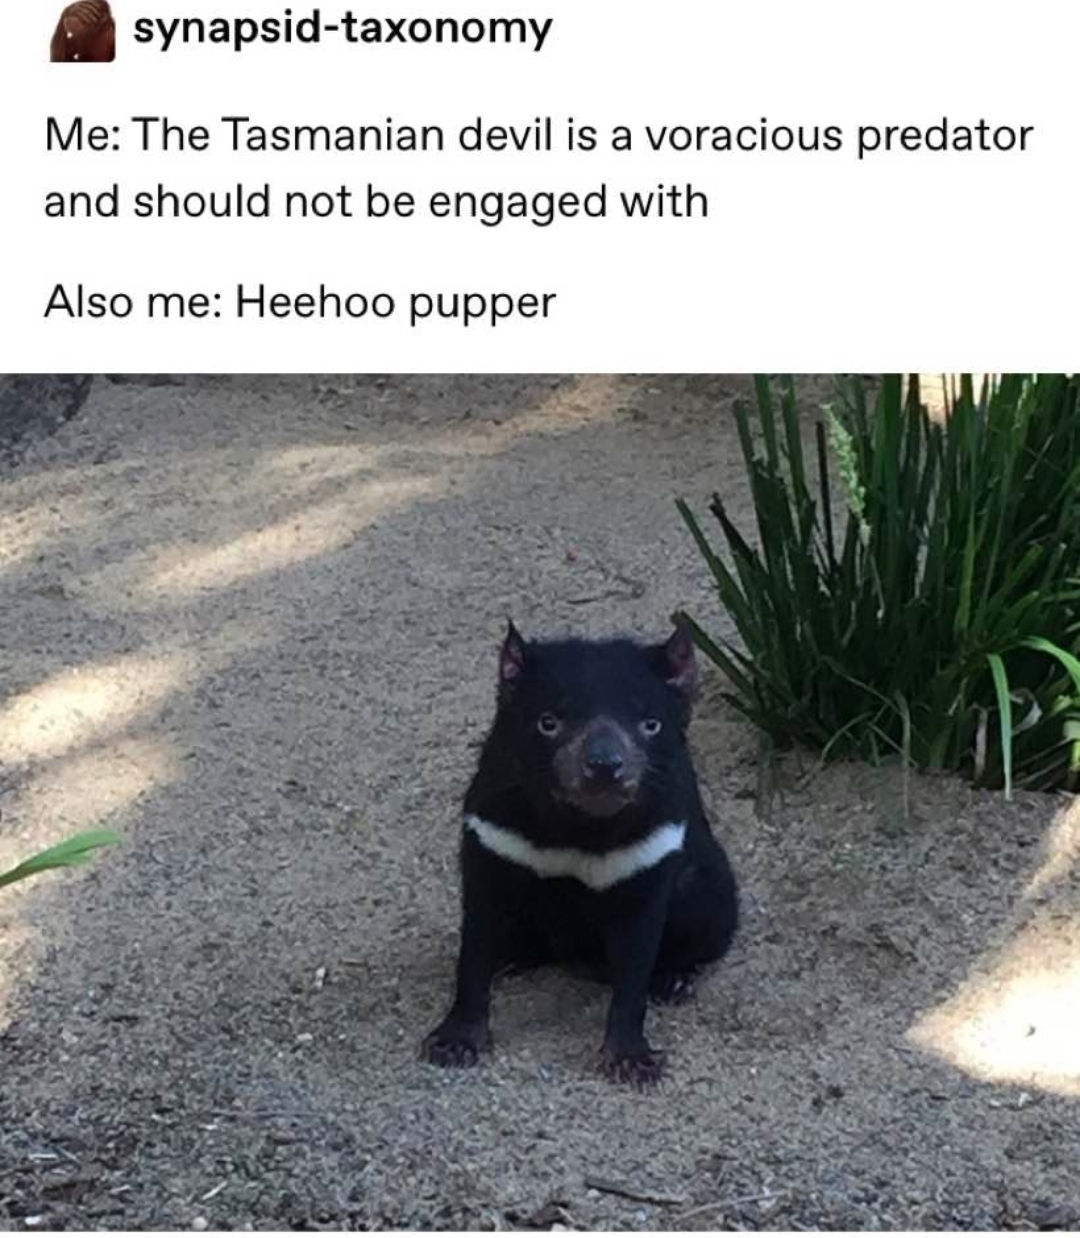 tasmanian devil heehoo pupper - synapsidtaxonomy Me The Tasmanian devil is a voracious predator and should not be engaged with Also me Heehoo pupper